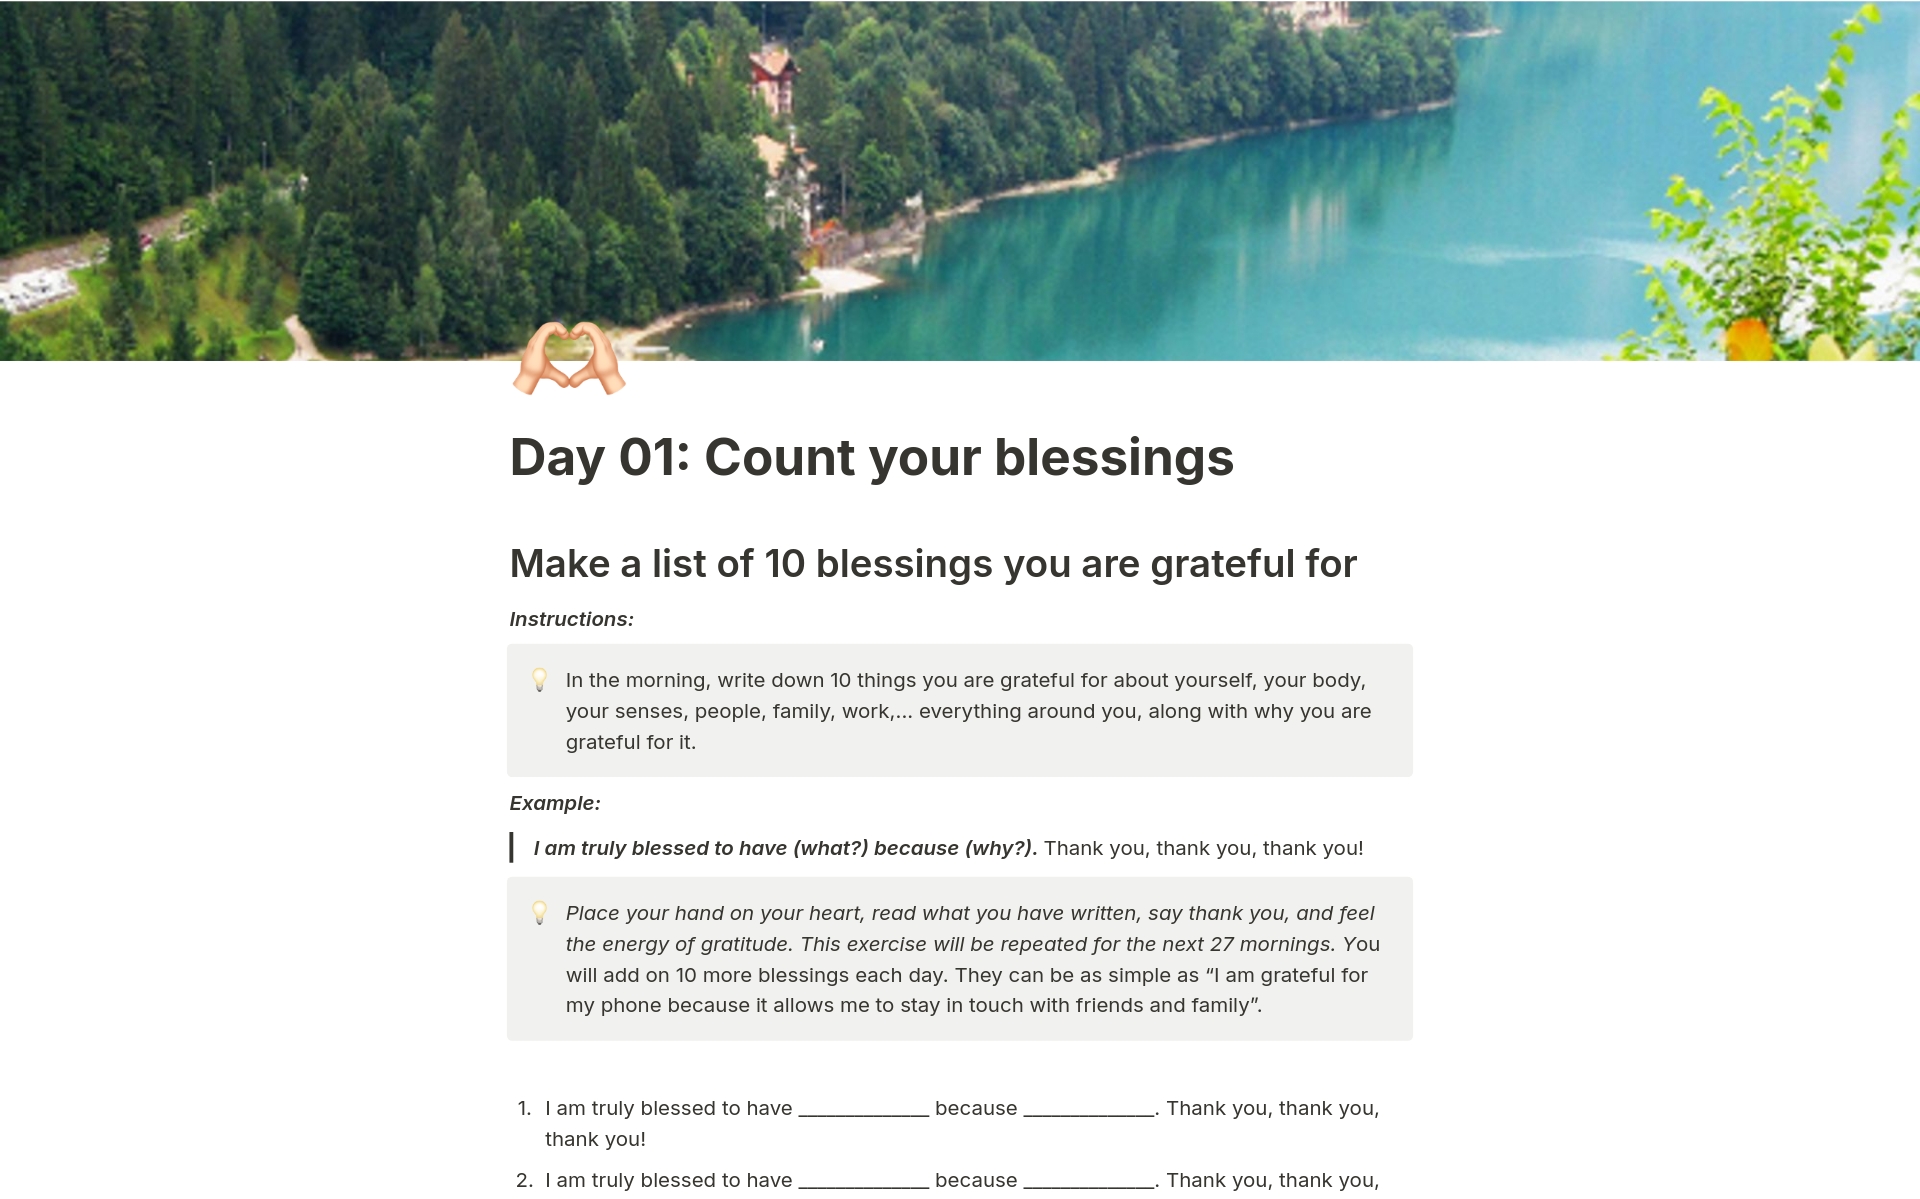 Transform your life with our Notion template inspired by 'The Magic' by Rhonda Byrne, organizing blessings and practicing 28 days of gratitude to harness the law of attraction.